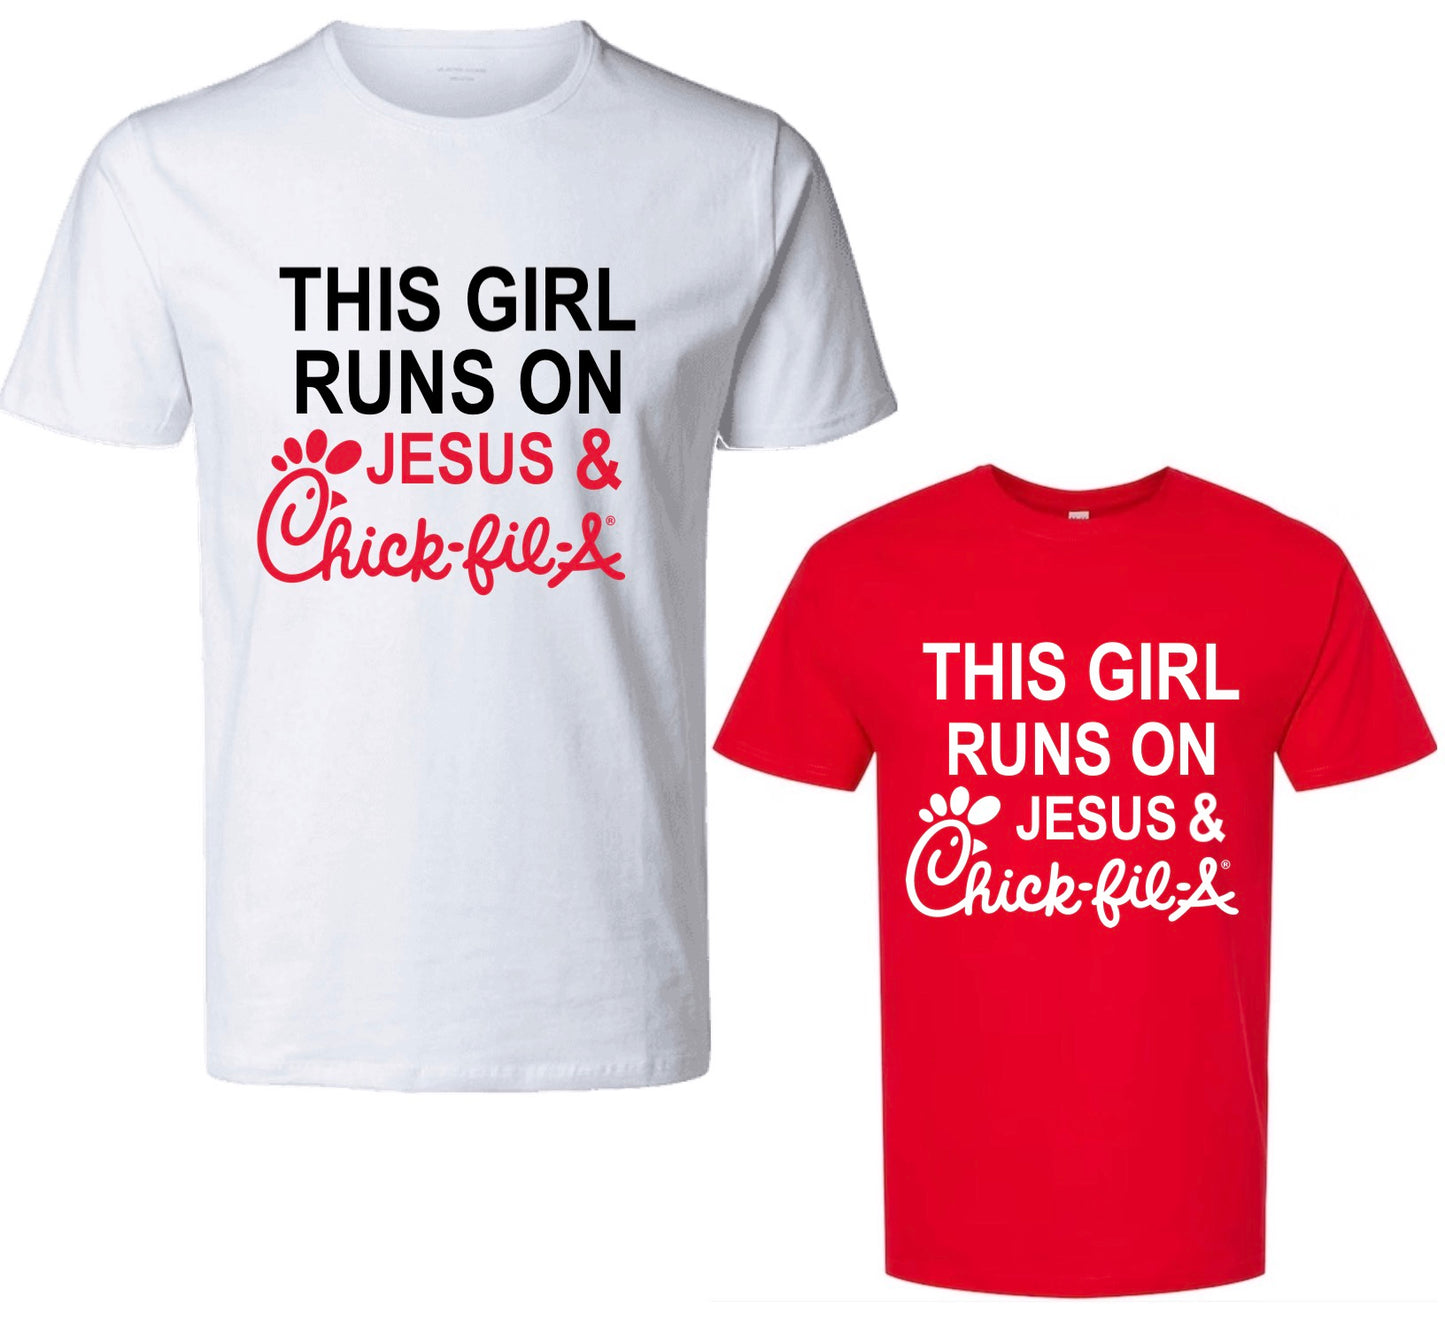 Running On Jesus & Chick-fil-A — FREE Shipping!